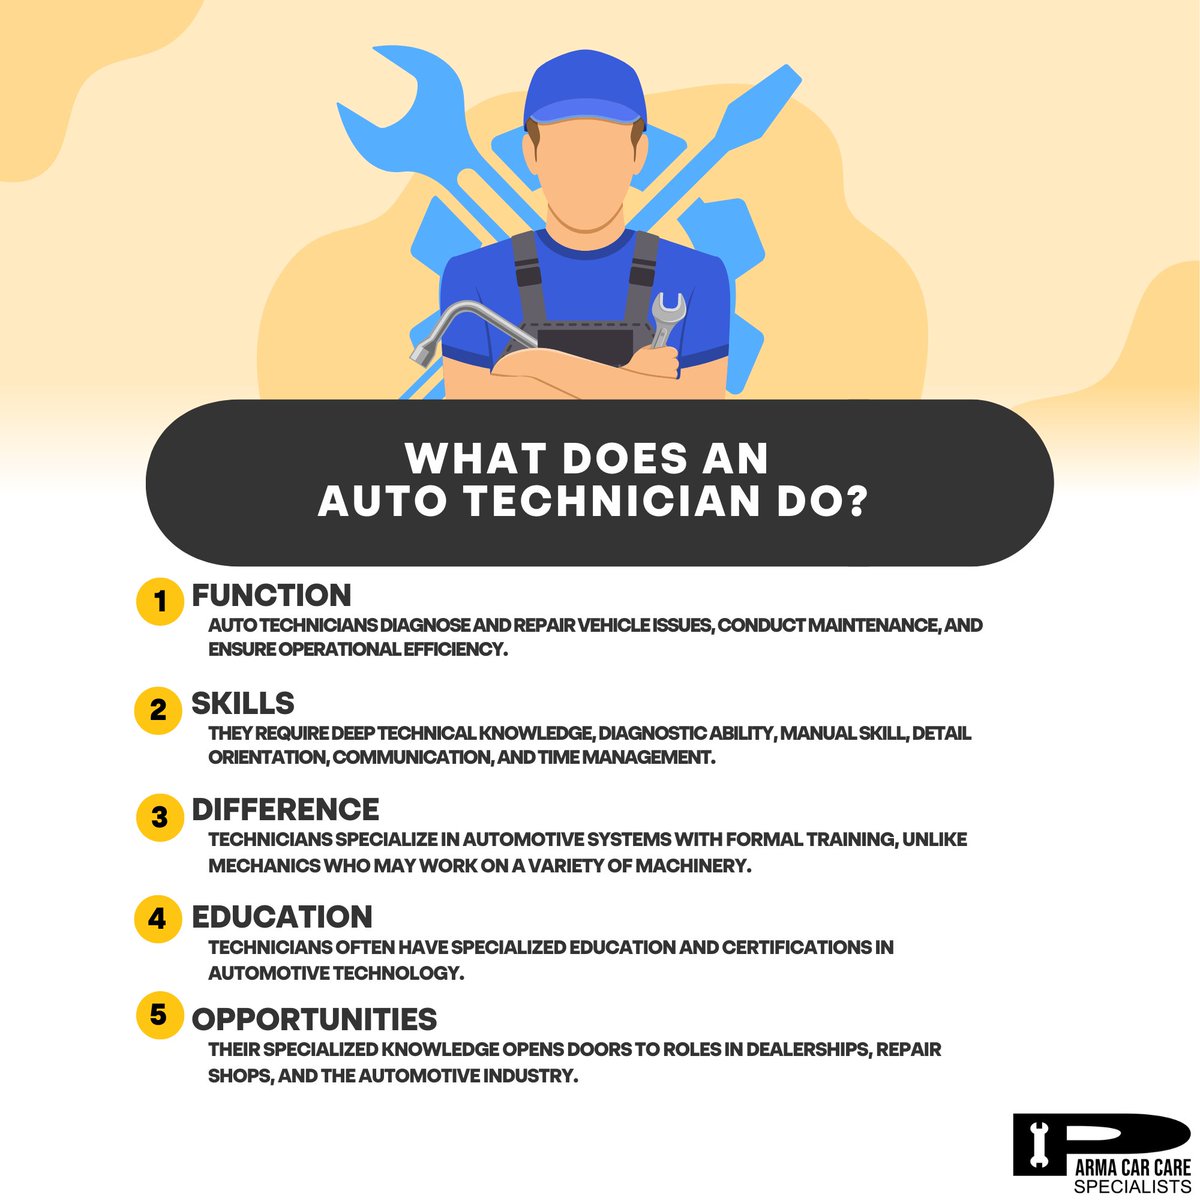 Auto technicians: Unsung heroes of the road. 🦸♂️🚘 Get a sneak peek into their world and how they keep your car running. Empower your ride with knowledge! 

zurl.co/LpS7 

#AutoTechLife #CarSafety #KnowYourCar #EmpowermentThroughEducation #RoadReady